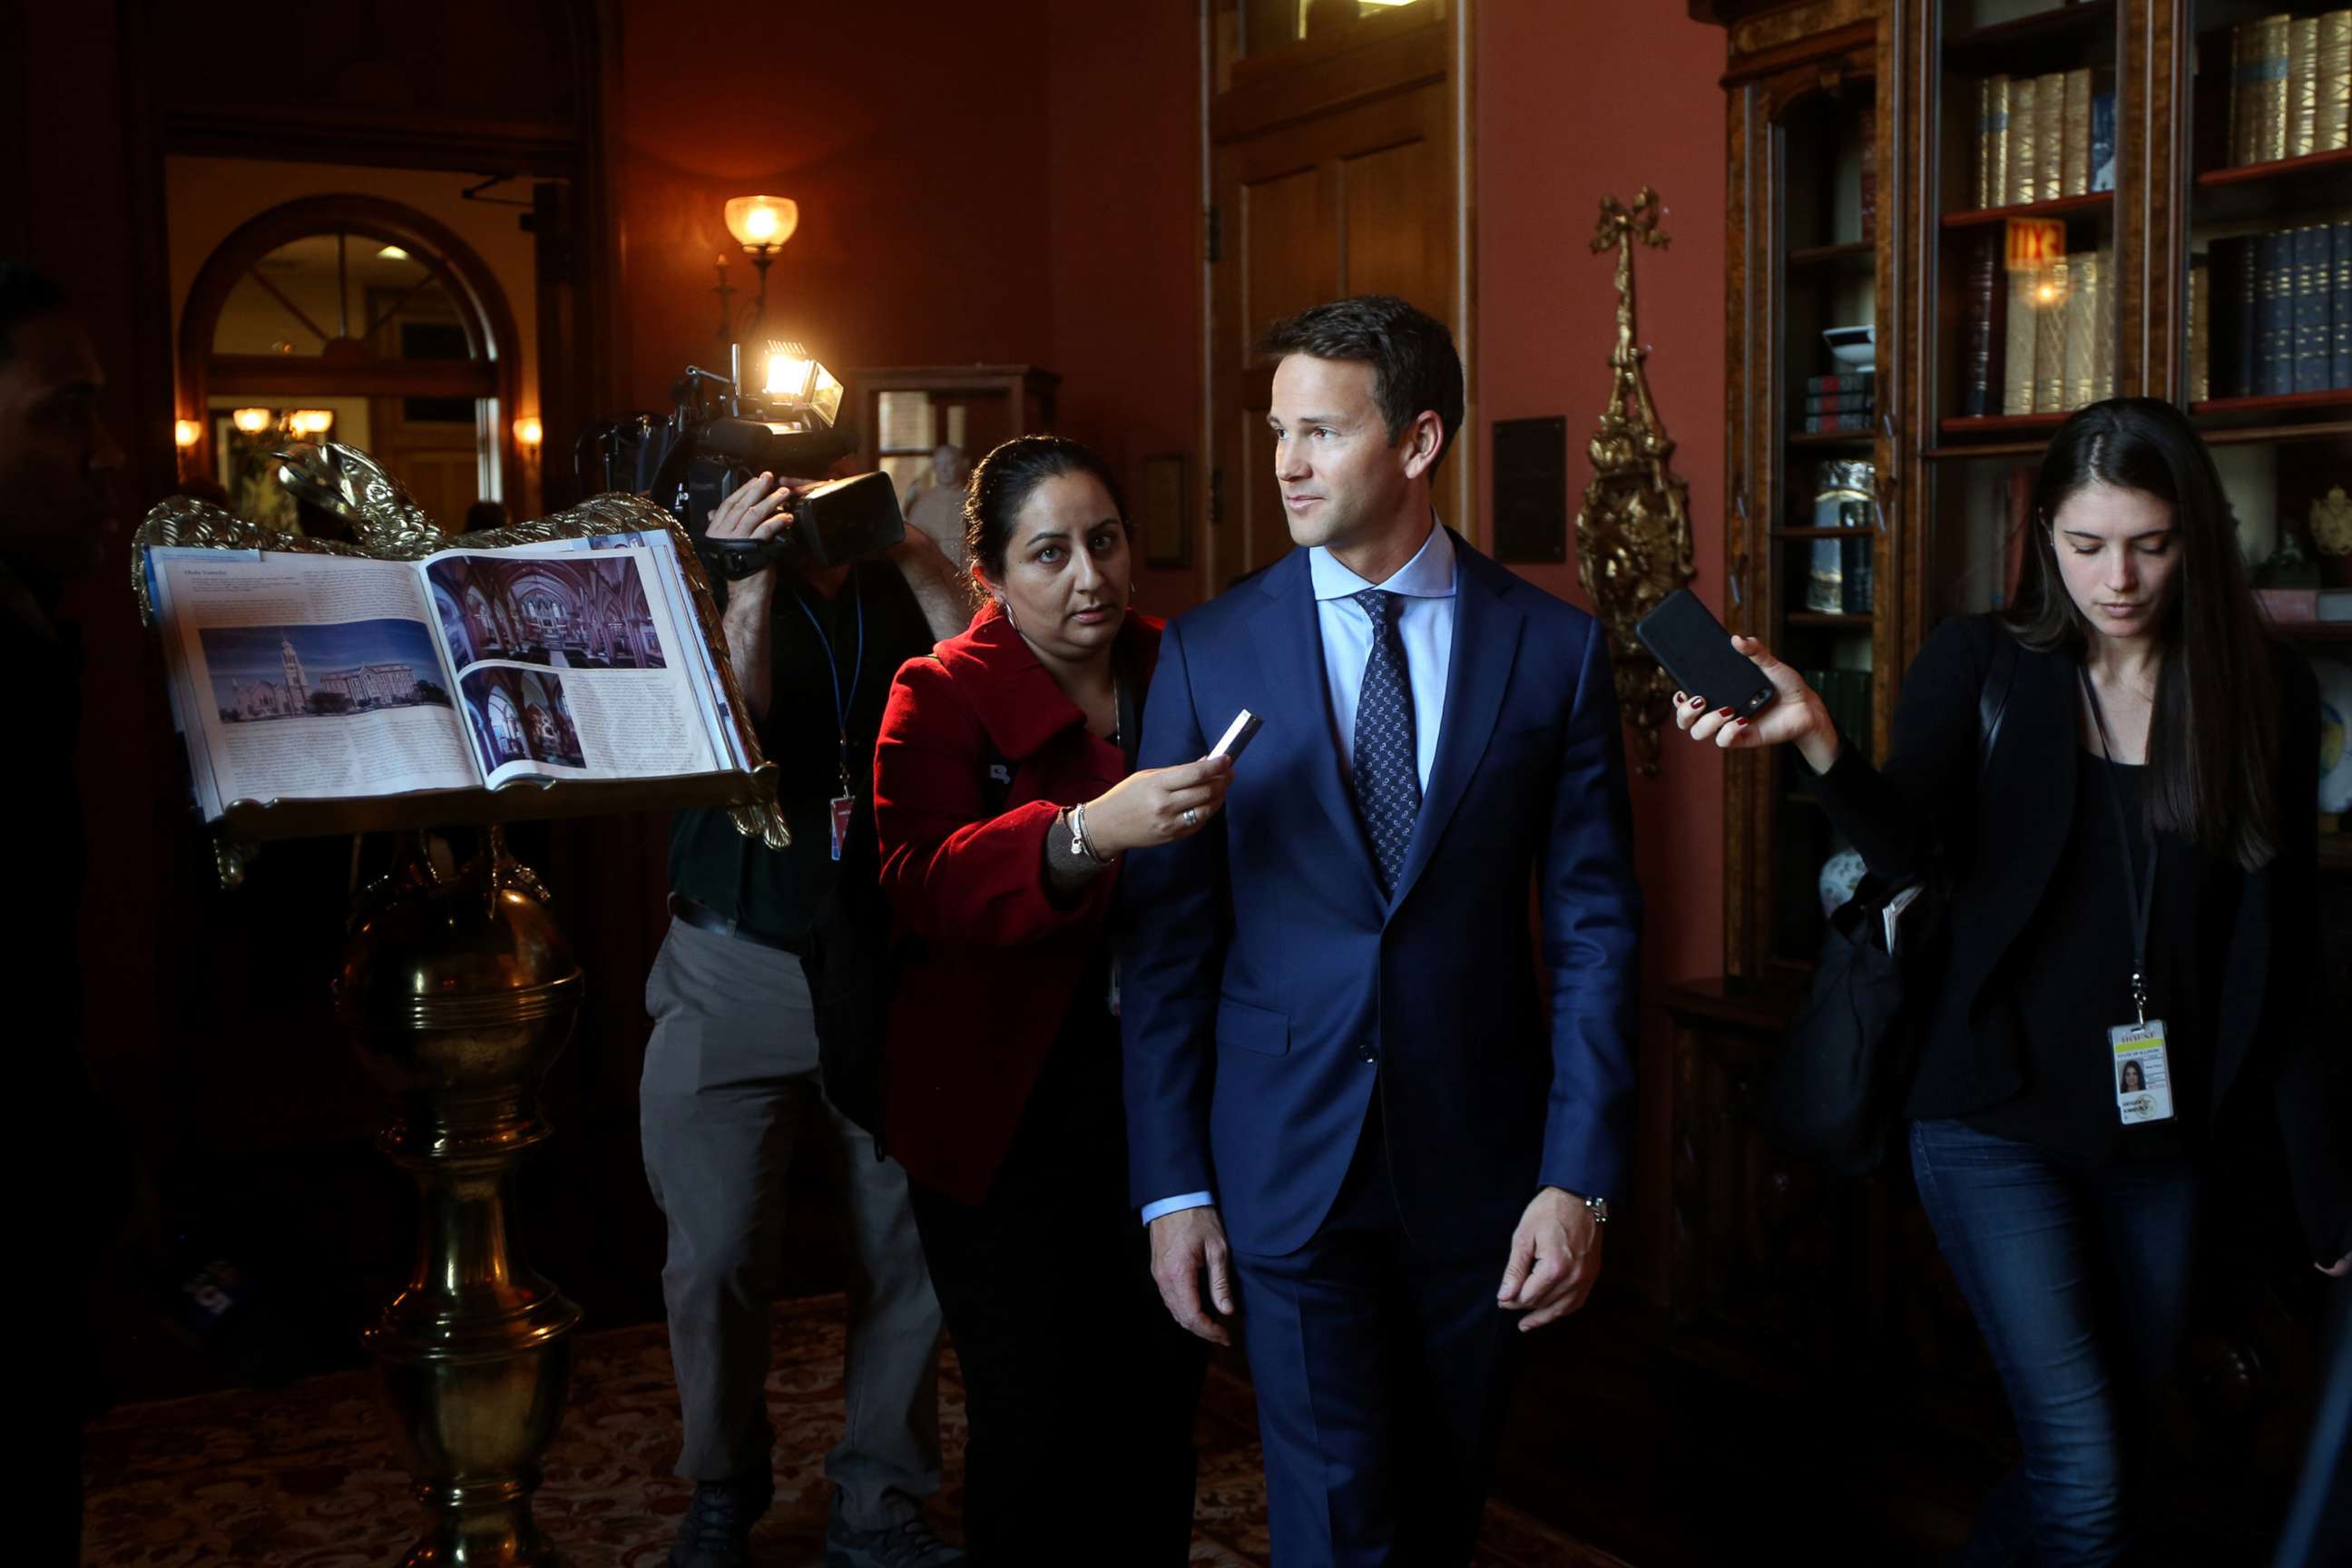 PHOTO: Congressman Aaron Schock speaks to the media as he arrives at St. Ignatius College Prep in Chicago, March 9, 2015.